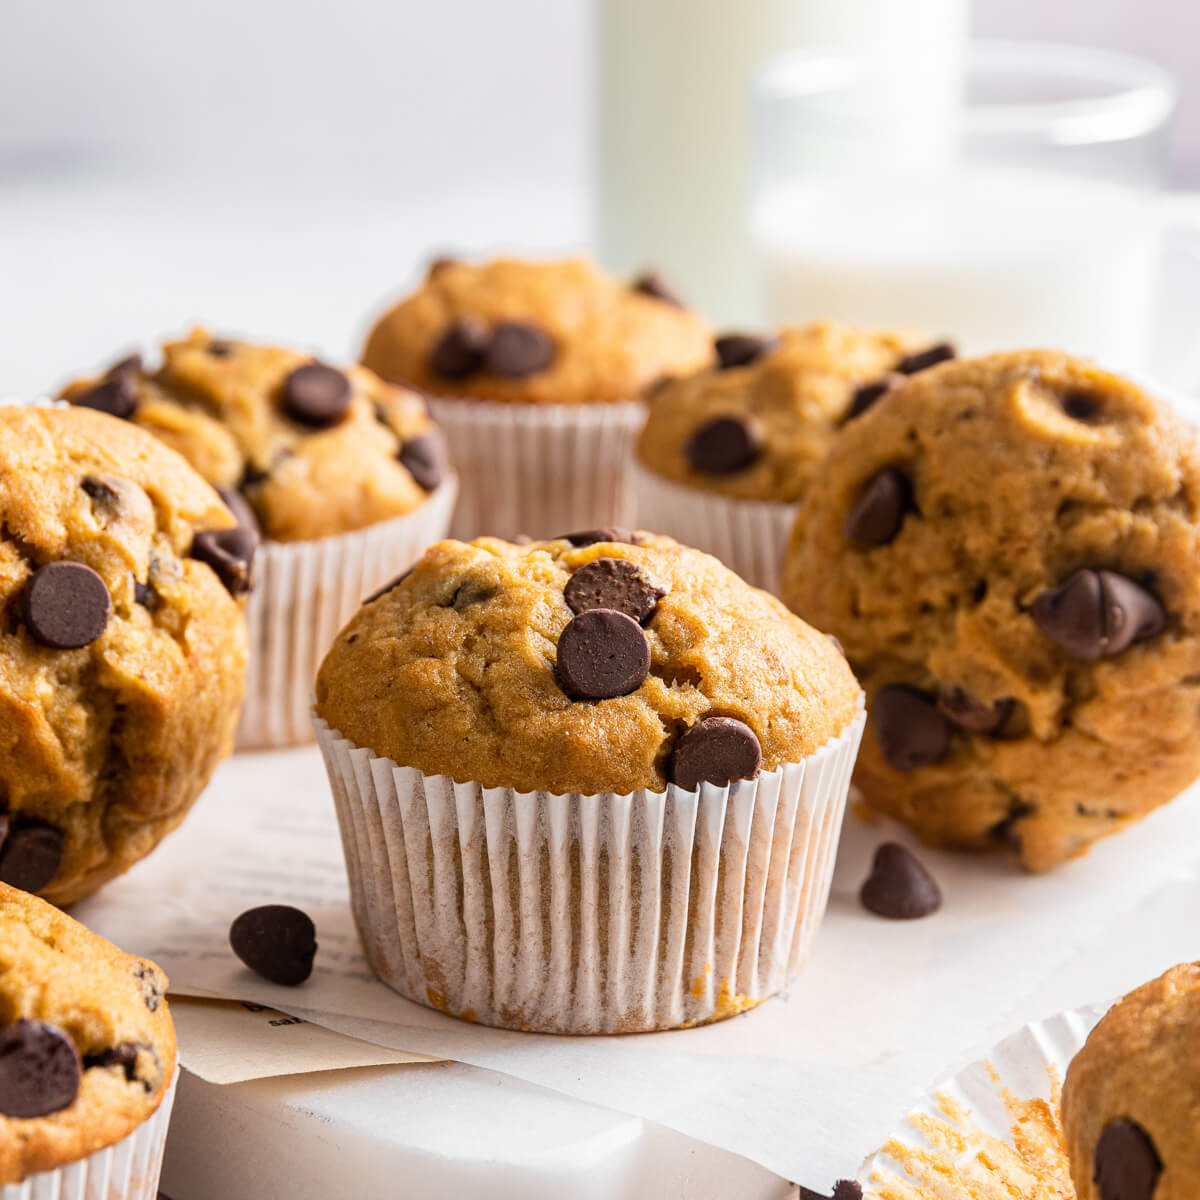 Golden baked Tahini Chocolate Chip Banana Muffins in white muffin papers.